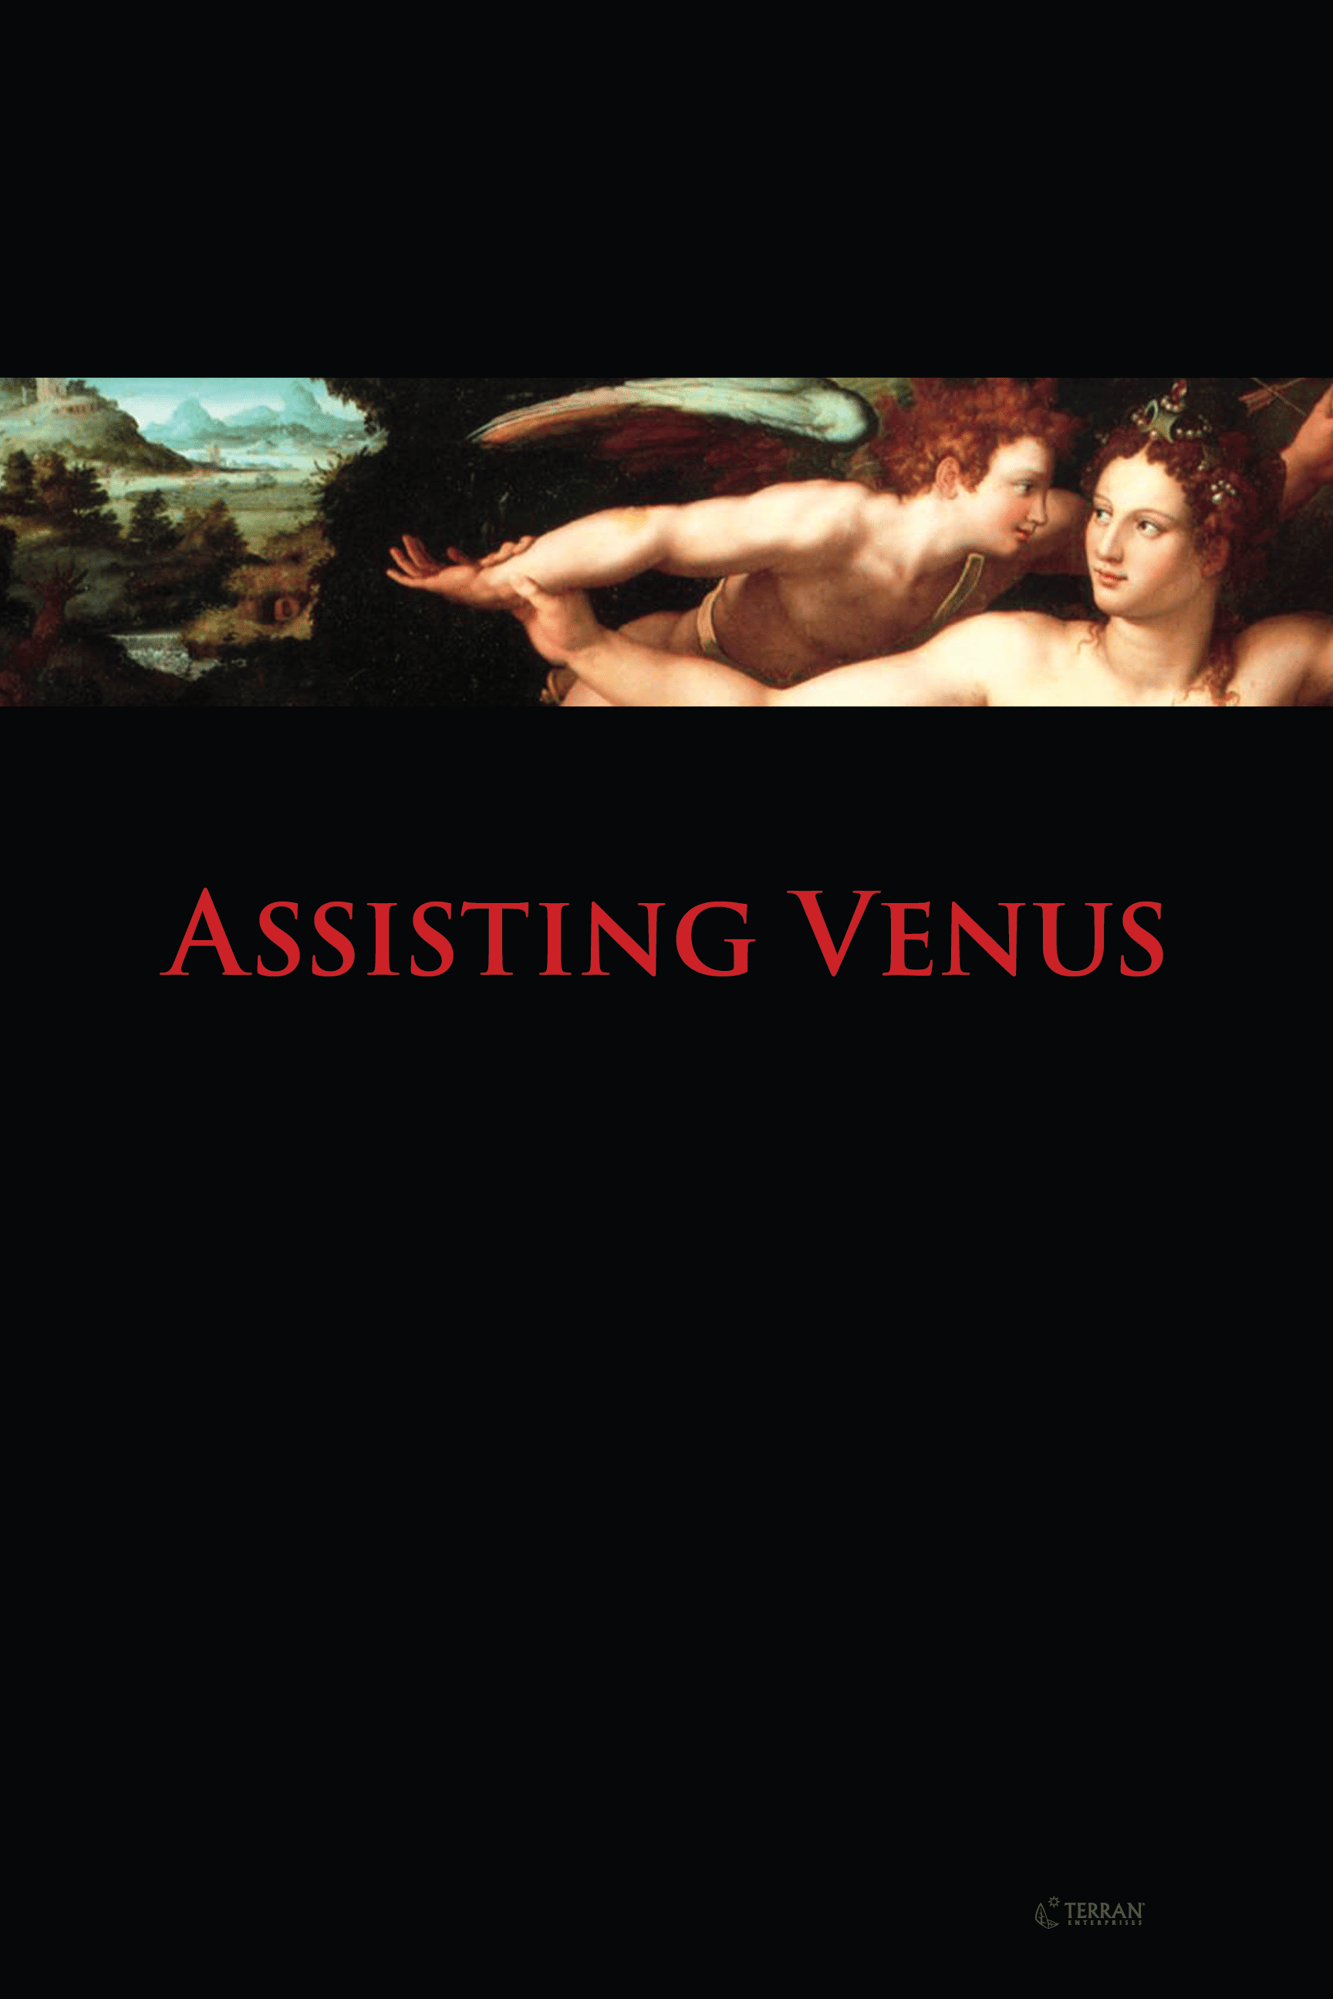 Movie poster for Assisting Venus featuring a classical painting of Venus and Cupid